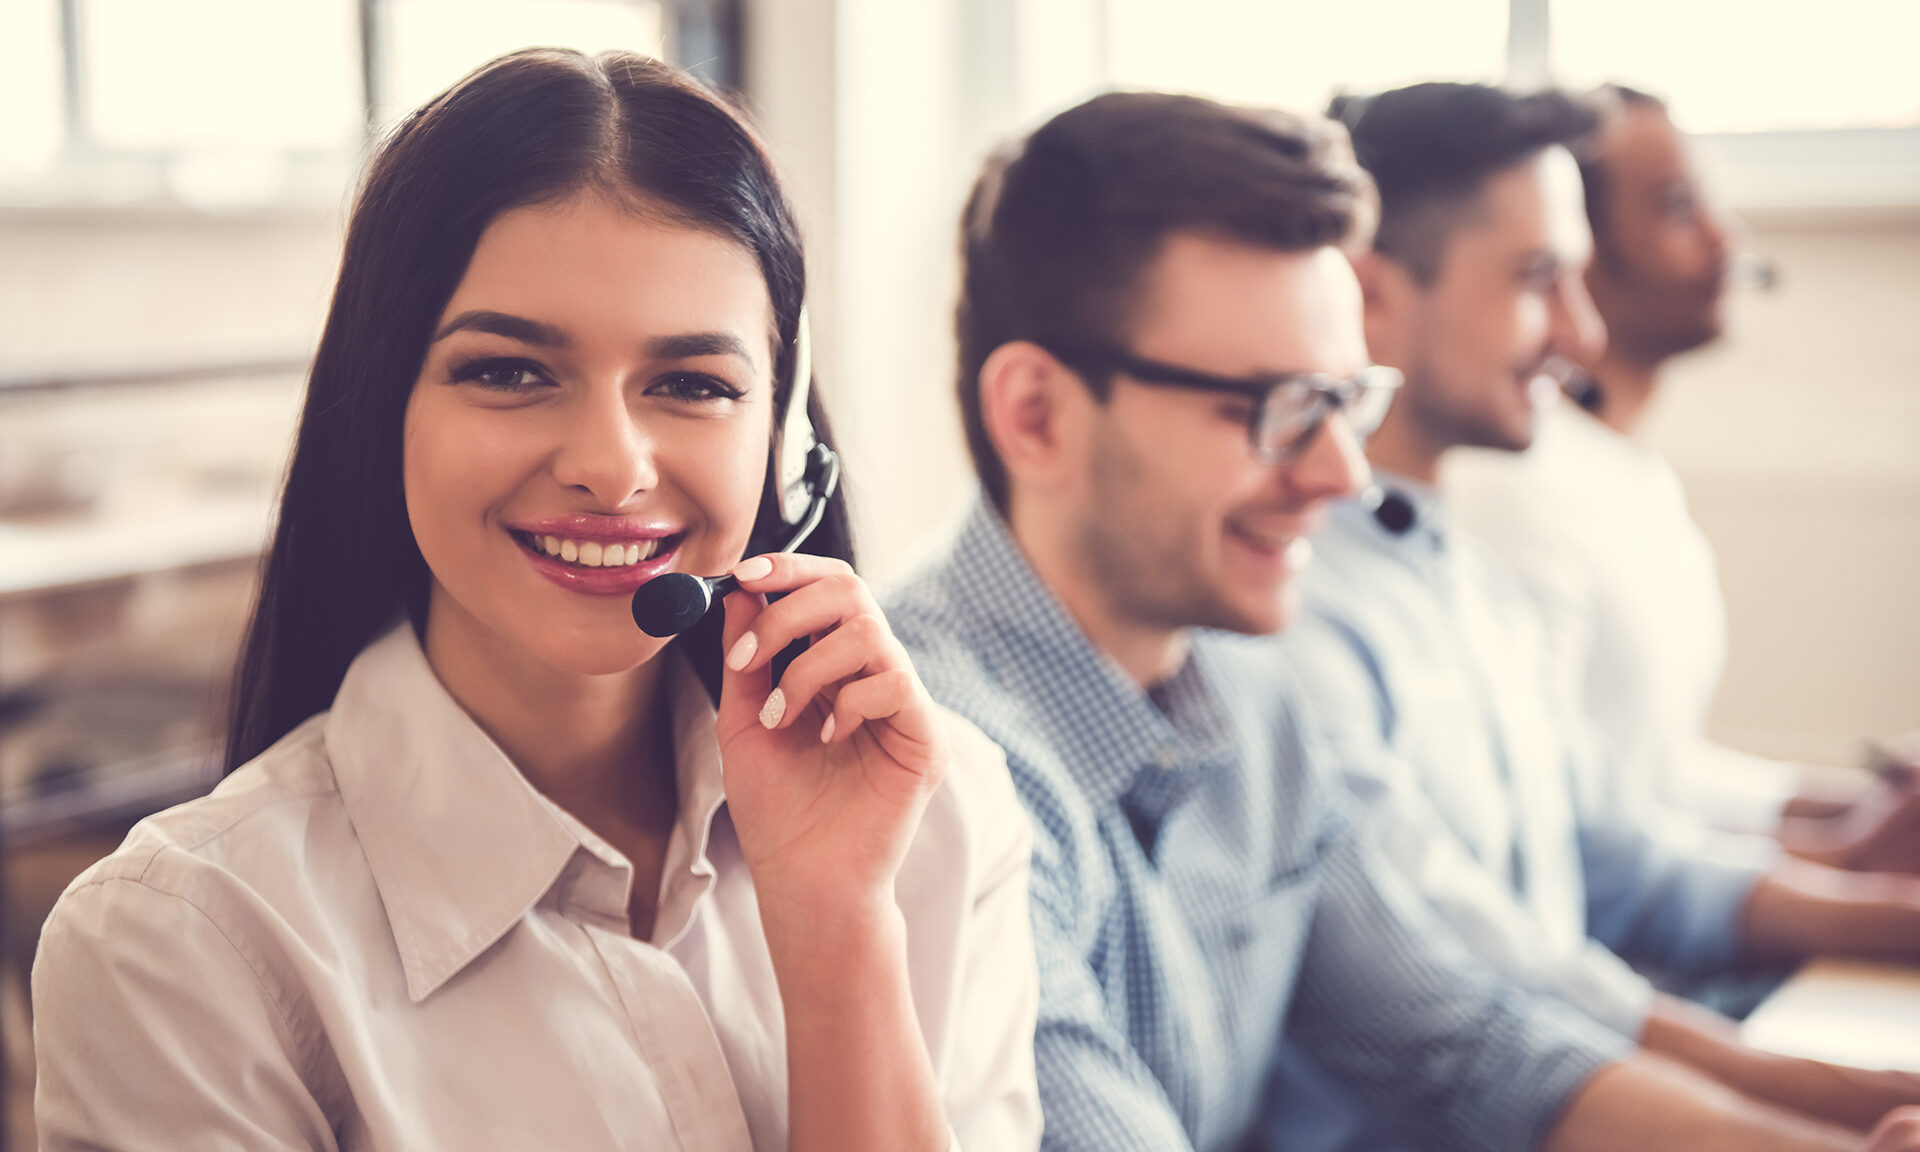 Smiling customer support team using customer support software and wearing headsets